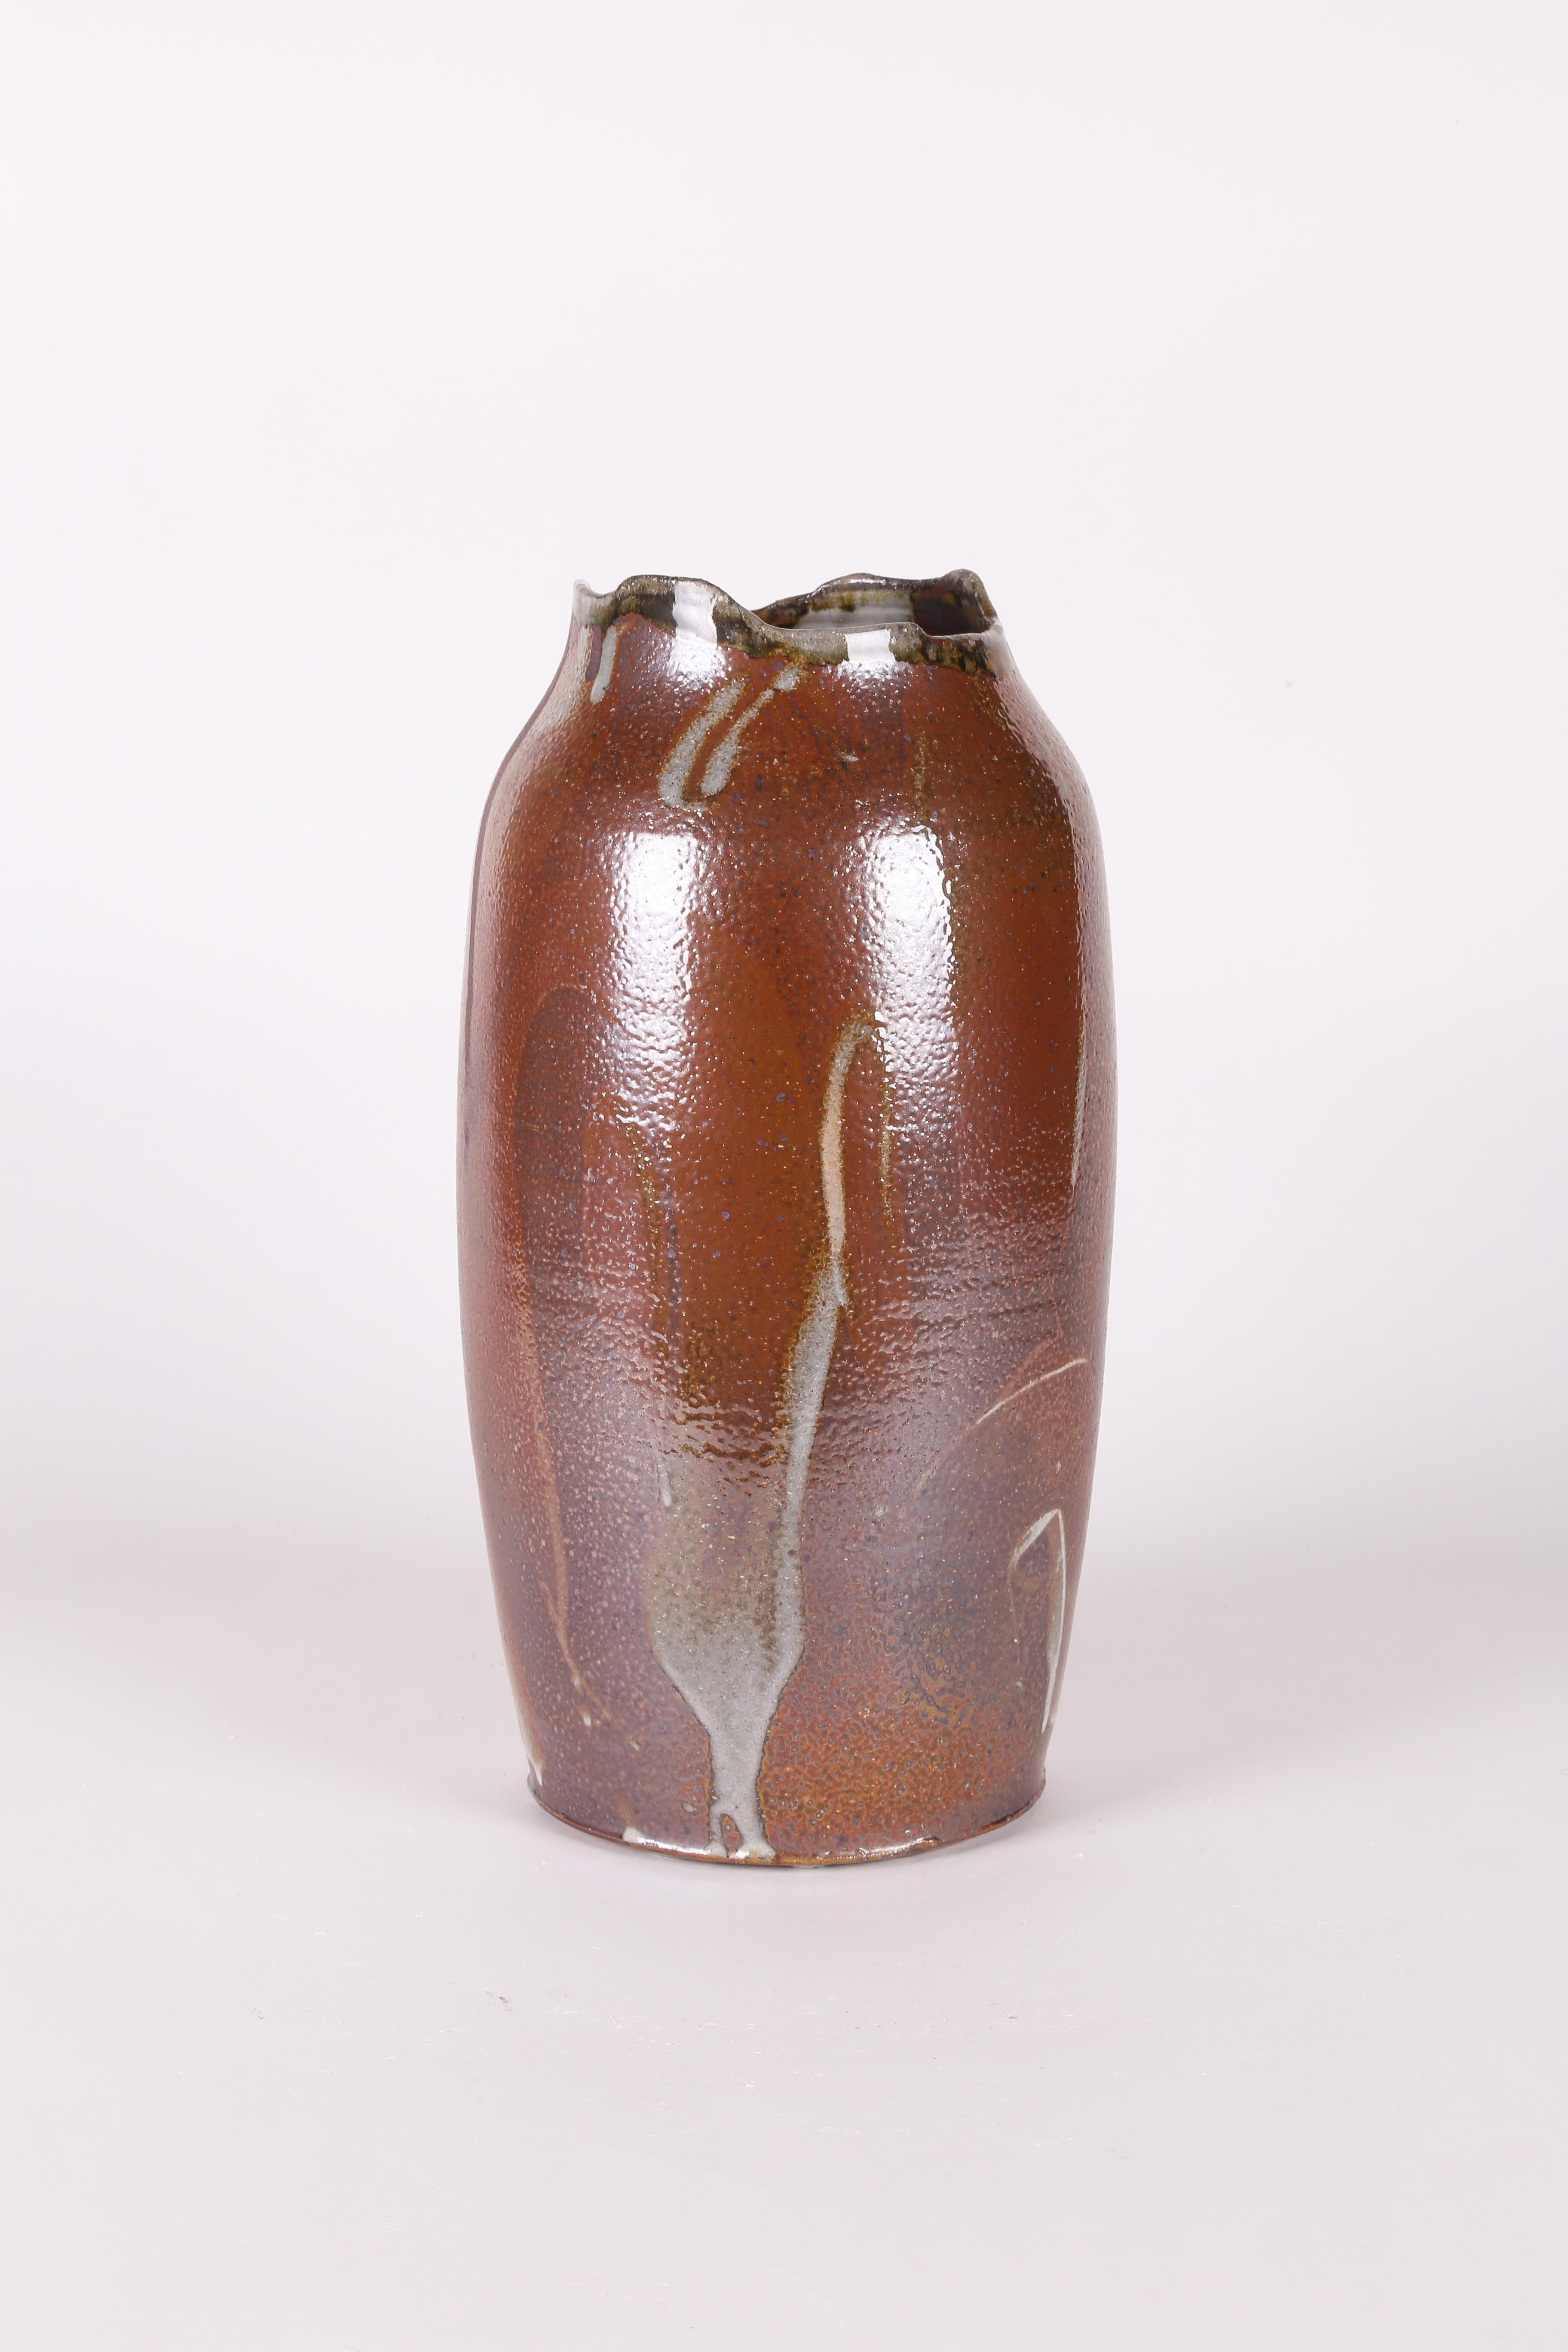 Hand-thrown and wood-fired stoneware vase in a richly saturated red ochre glaze with expressive, gestural streaks of deep brown and rust-colored earth tones throughout. Hand-crafted in the studio of noted Detroit-based ceramicist and sculptor